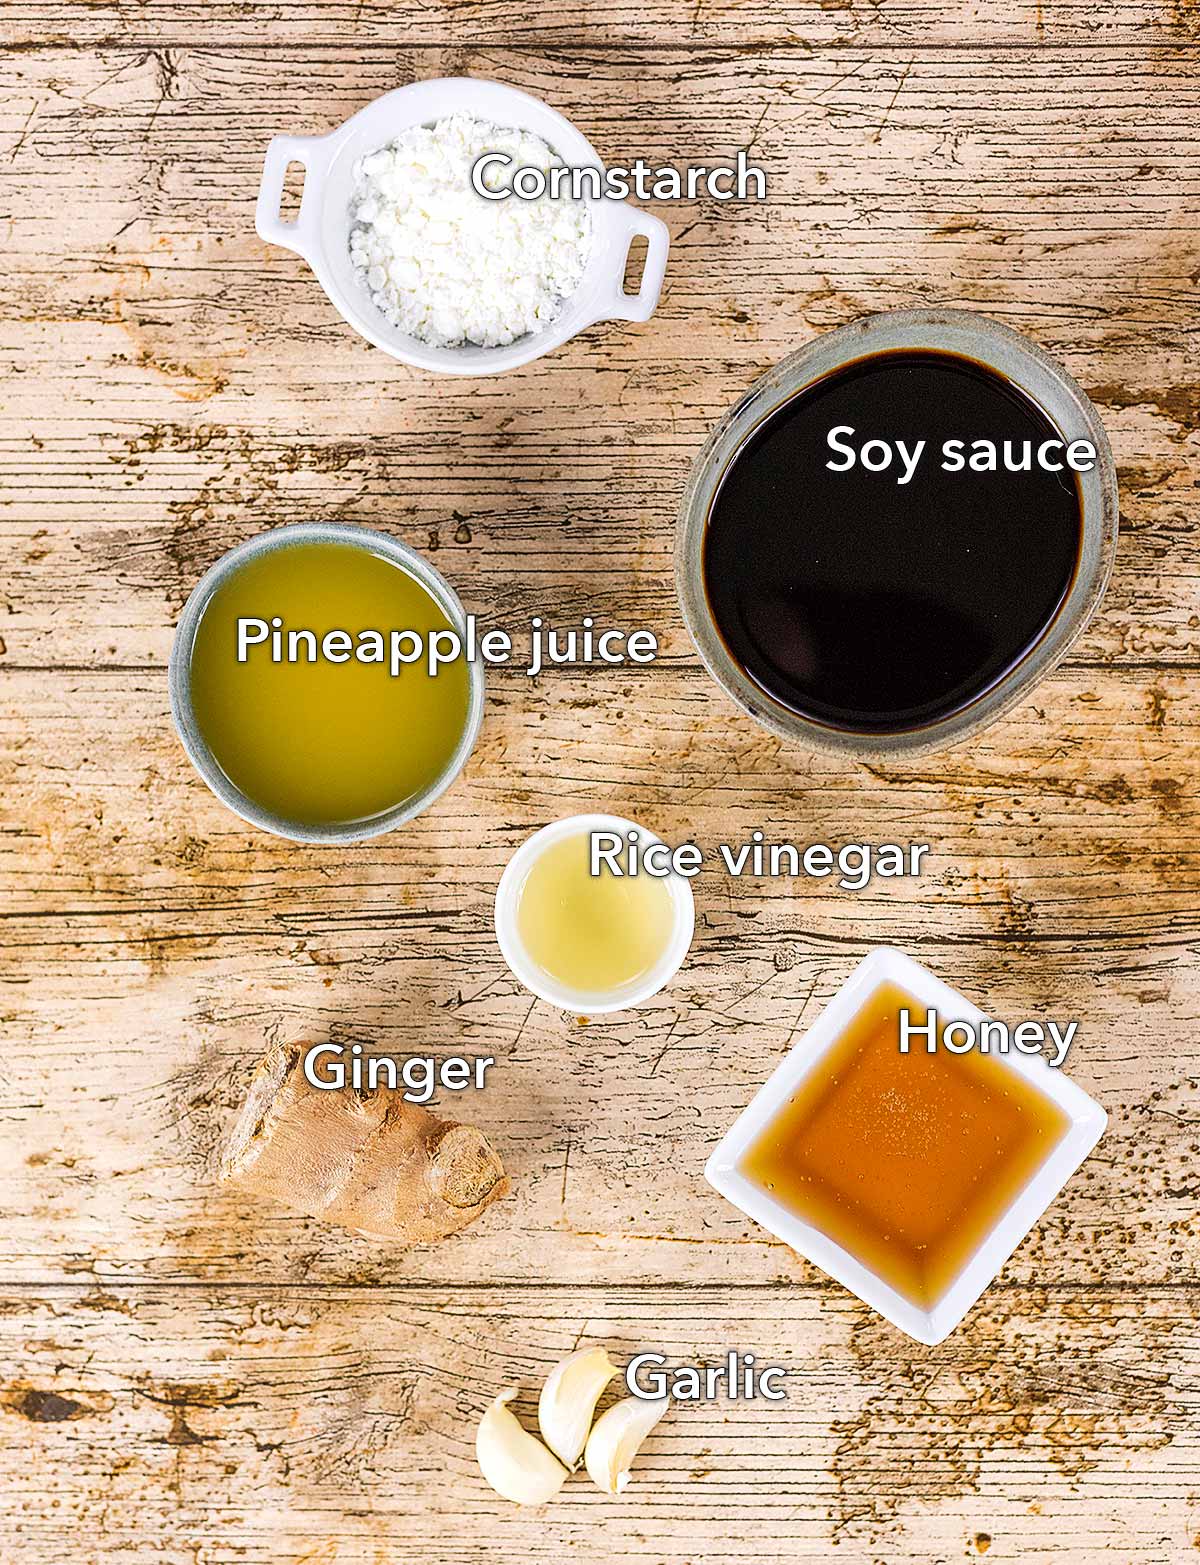 The ingredients for homemade teriyaki sauce laid out on a wooden surface.